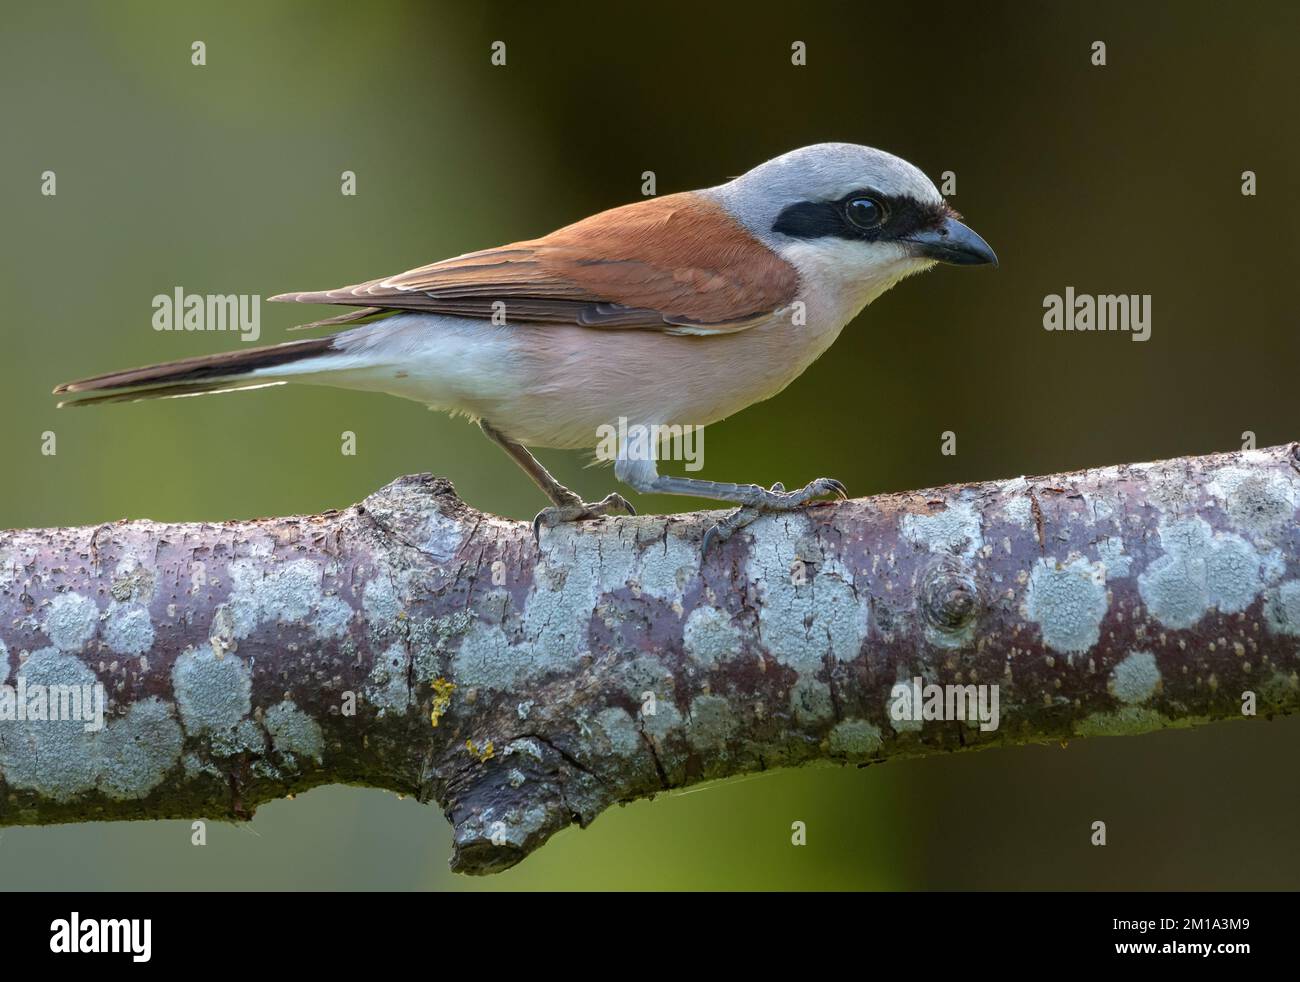 Male Red-backed Shrike (lanius collurio) perched on densely lichen covered branch in soft light Stock Photo